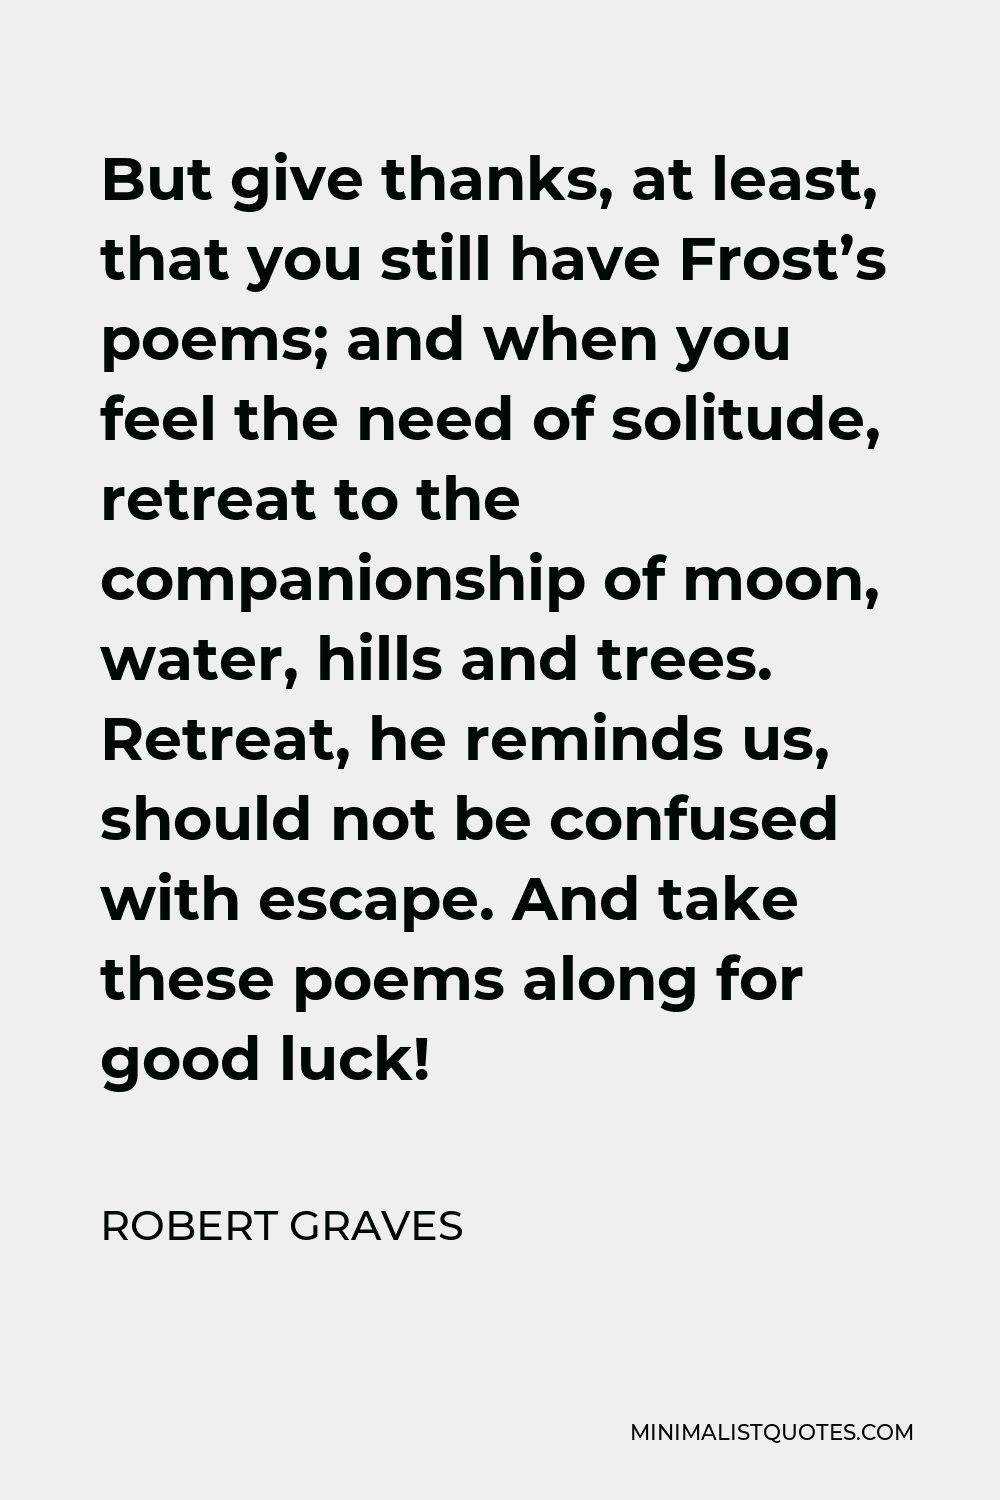 Robert Graves Quote - But give thanks, at least, that you still have Frost’s poems; and when you feel the need of solitude, retreat to the companionship of moon, water, hills and trees. Retreat, he reminds us, should not be confused with escape. And take these poems along for good luck!